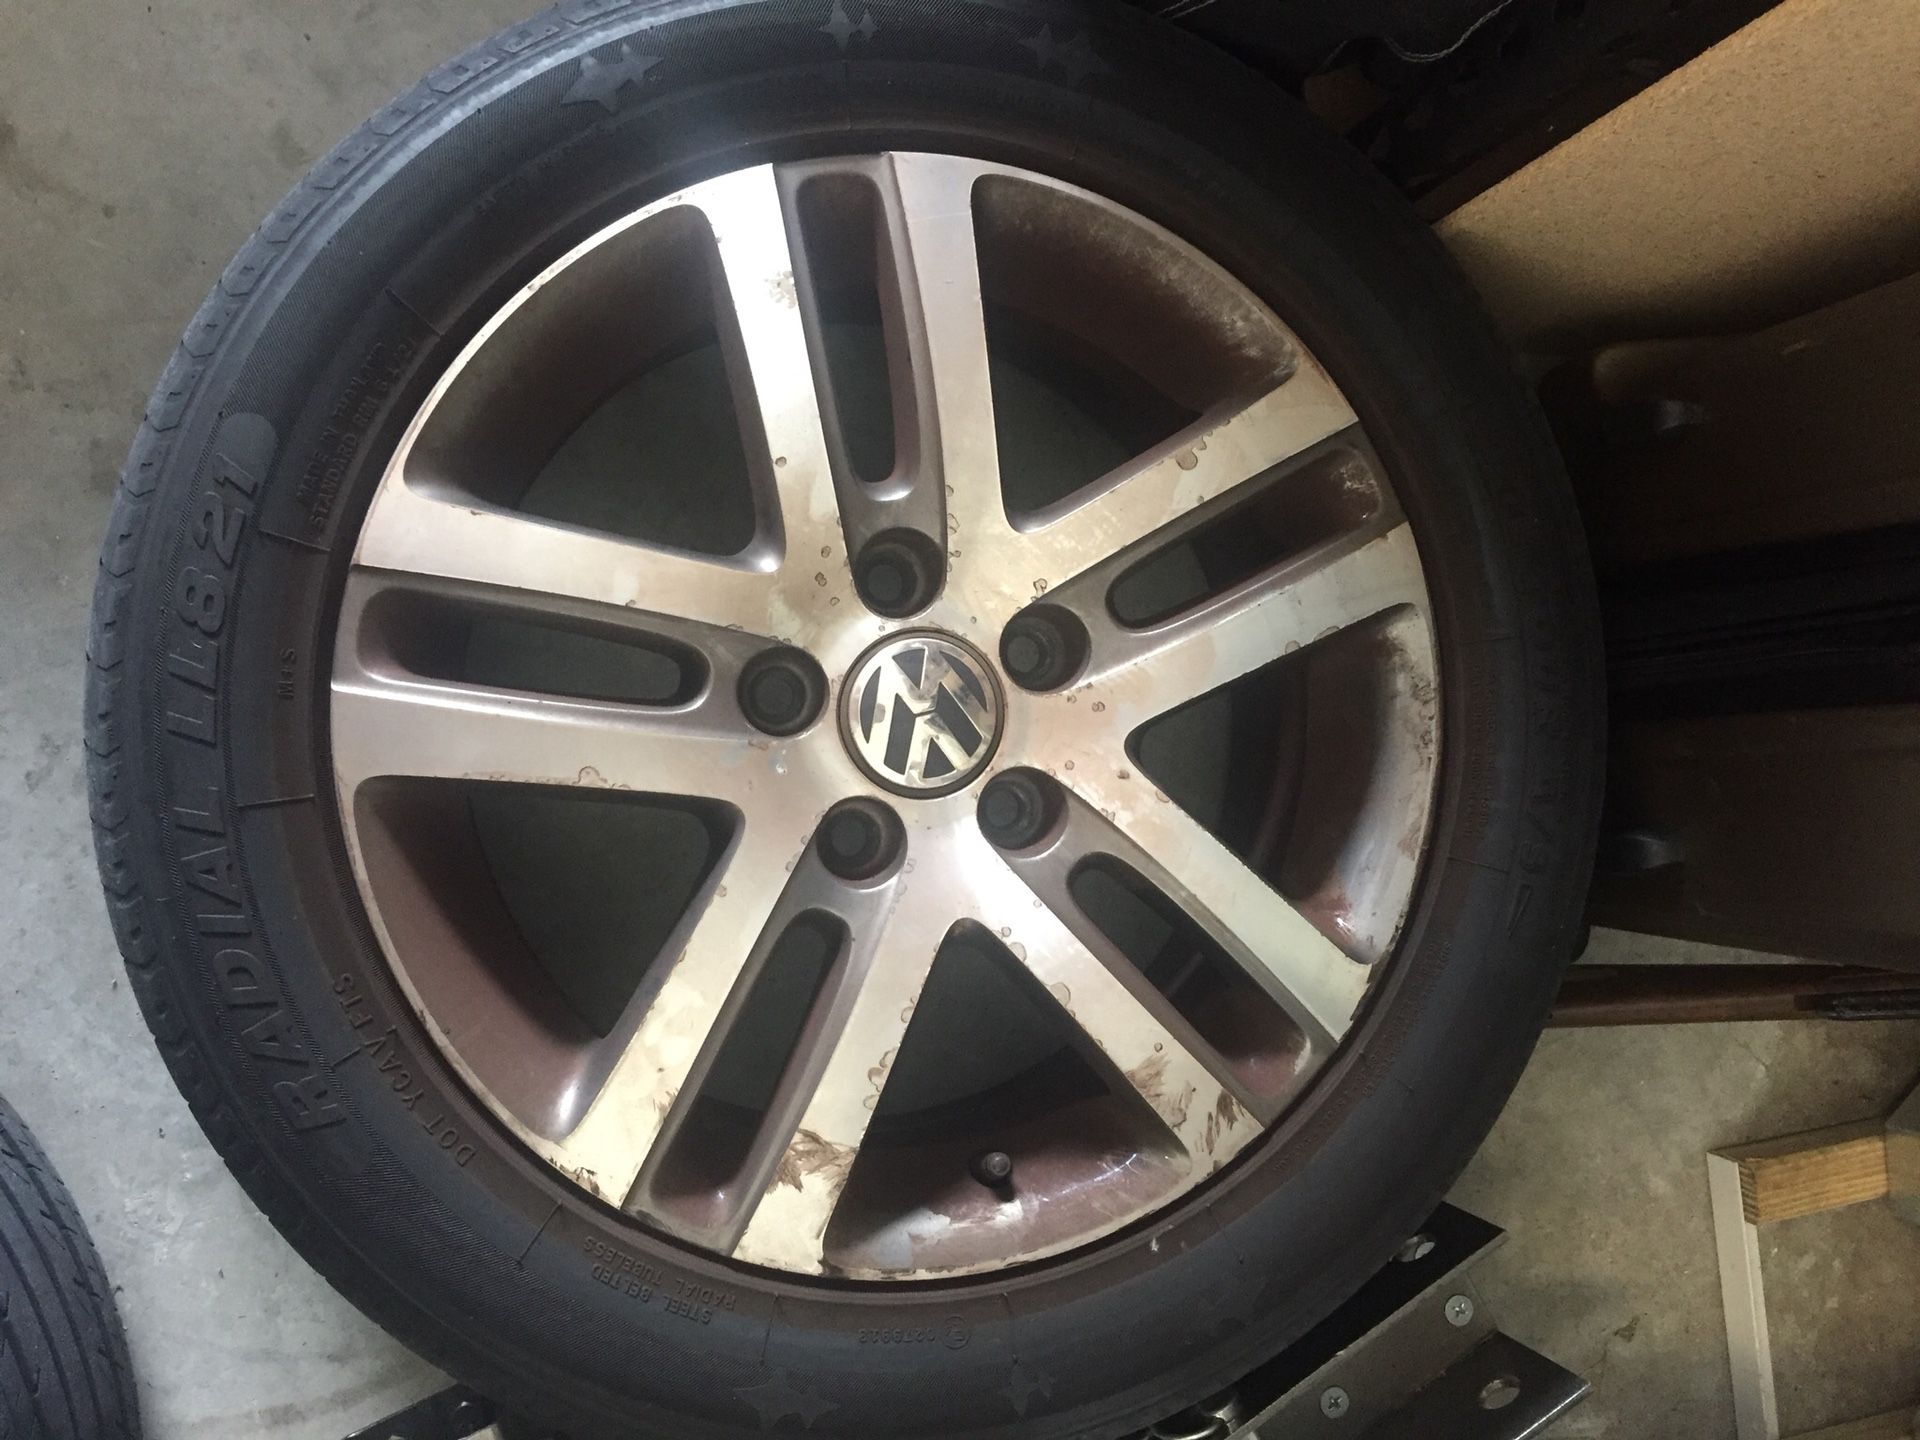 VW Aluminum wheels with Tires